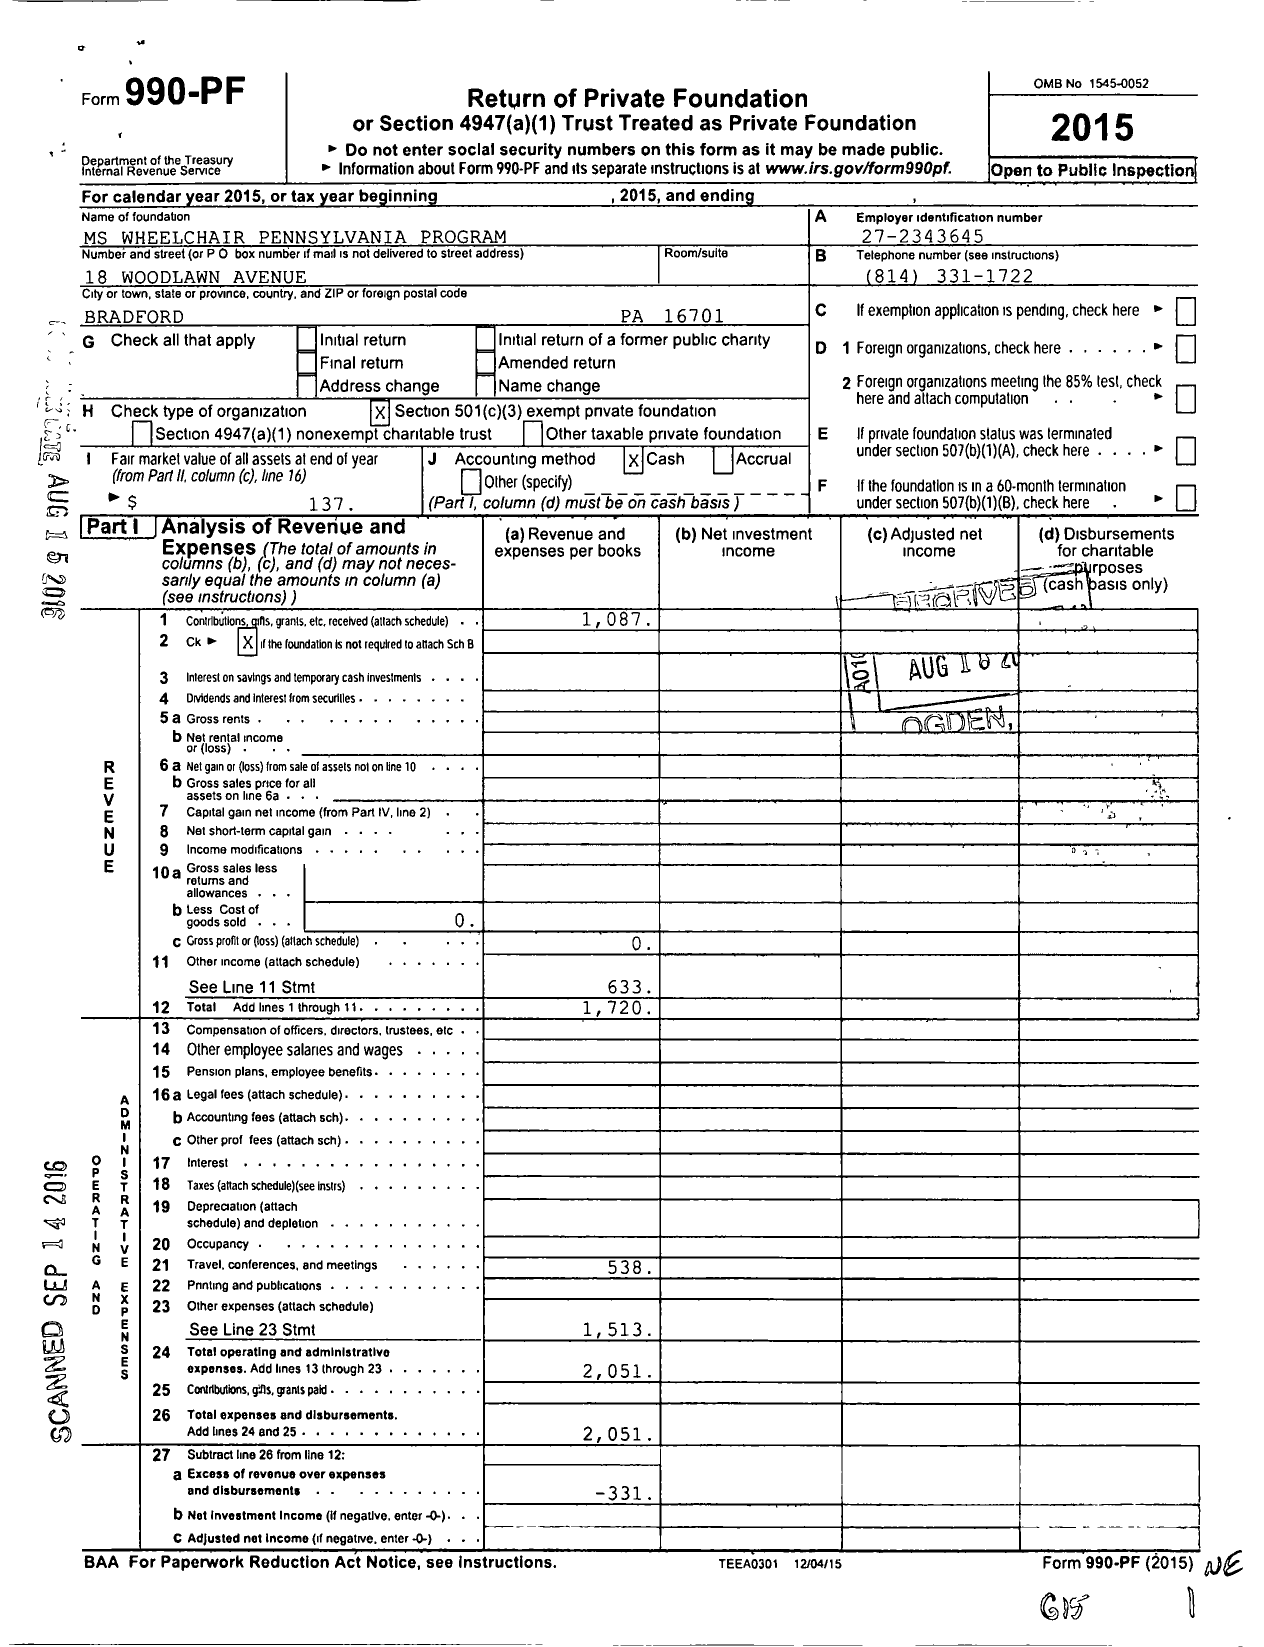 Image of first page of 2015 Form 990PF for MS Wheelchair Pennsylvania Program